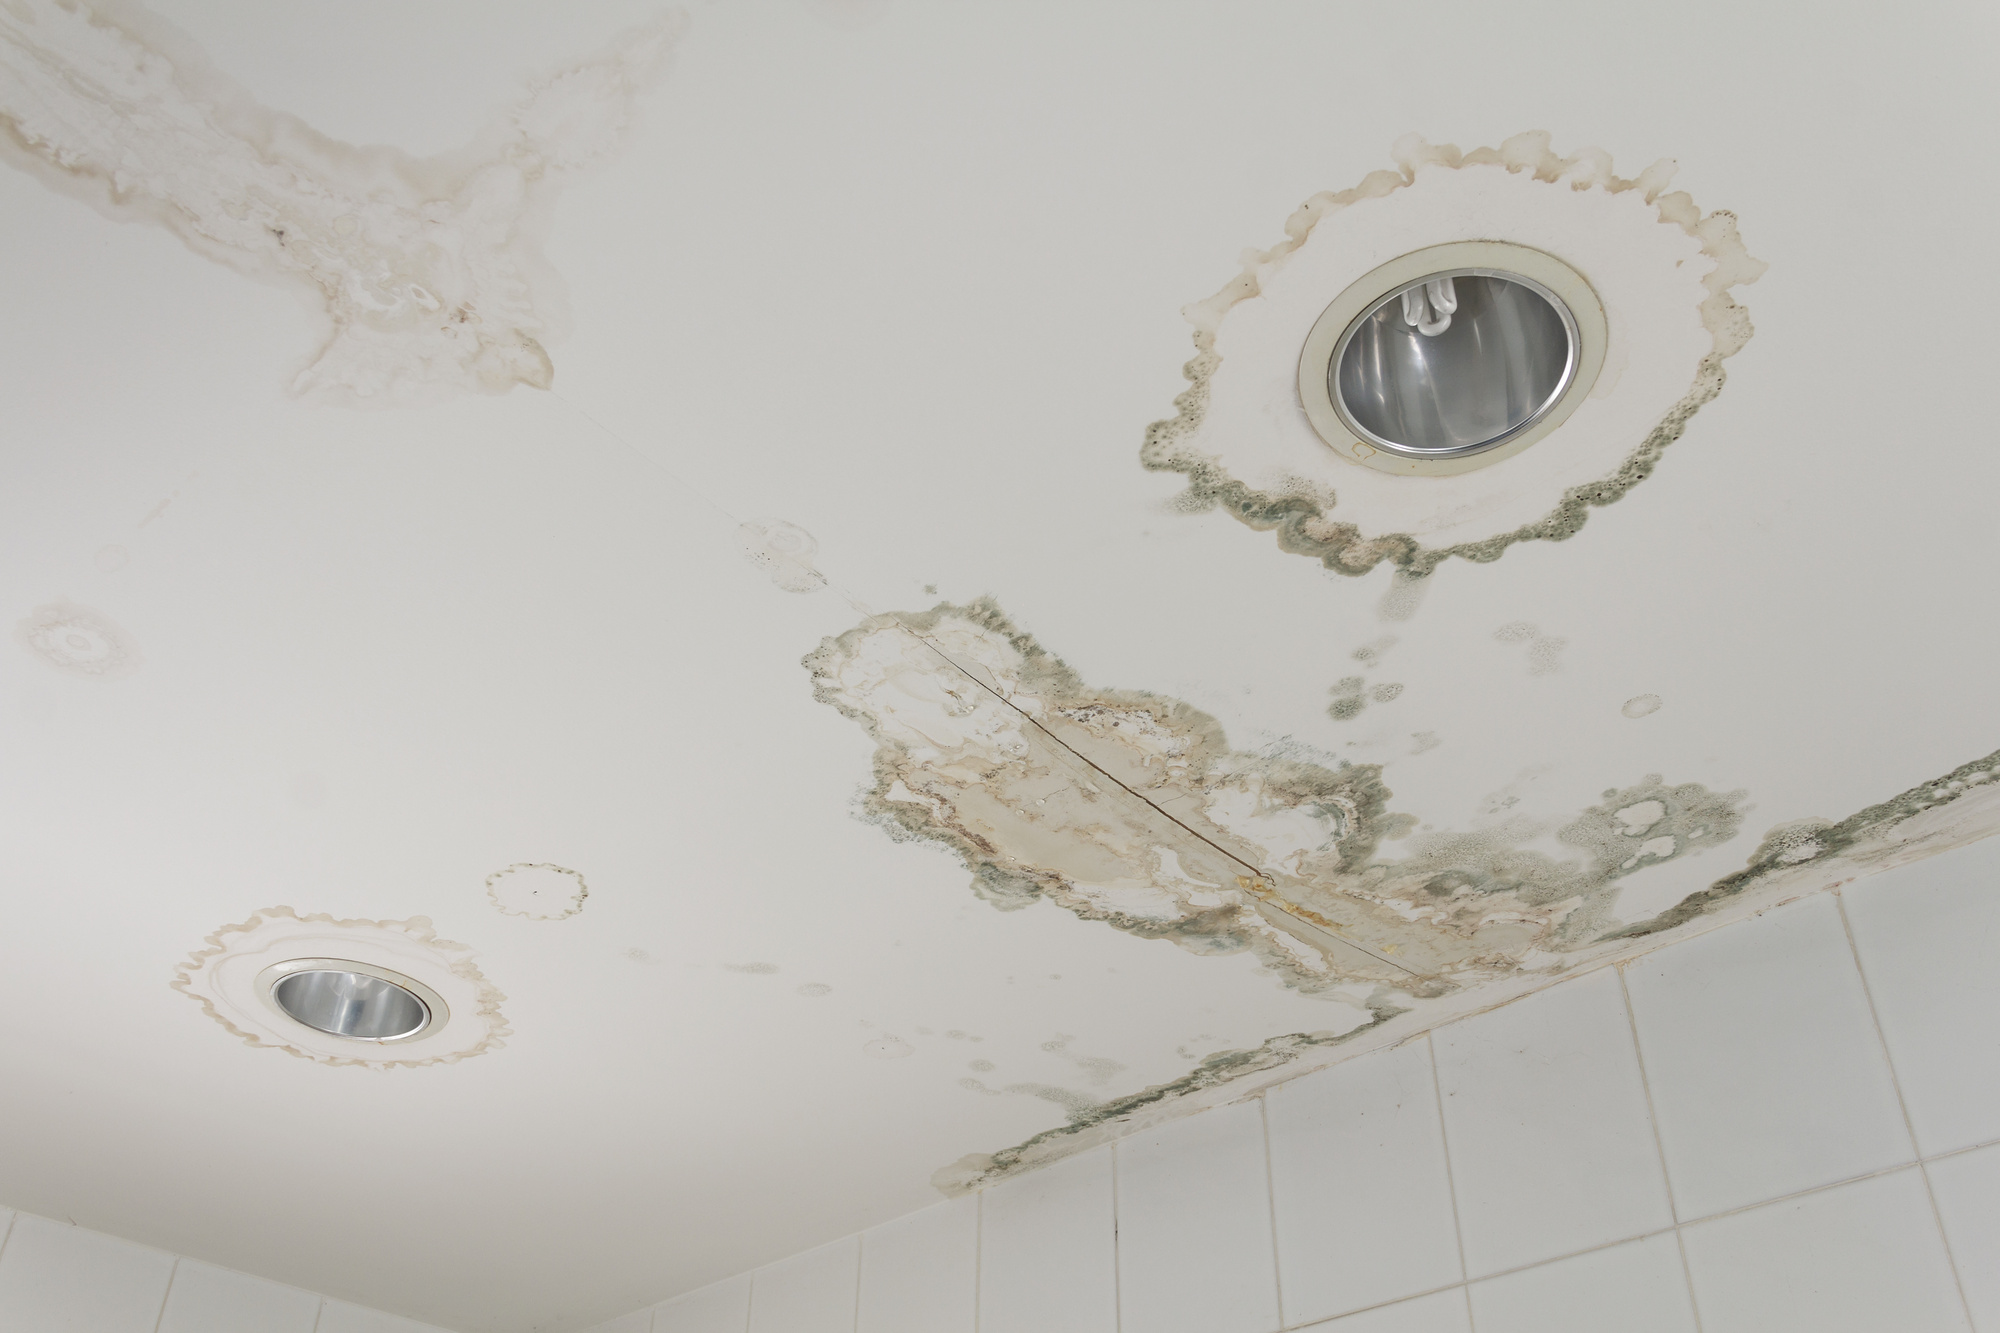 If you've discovered water spots on the ceiling with no visible leak, click here to explore possible causes and solutions!